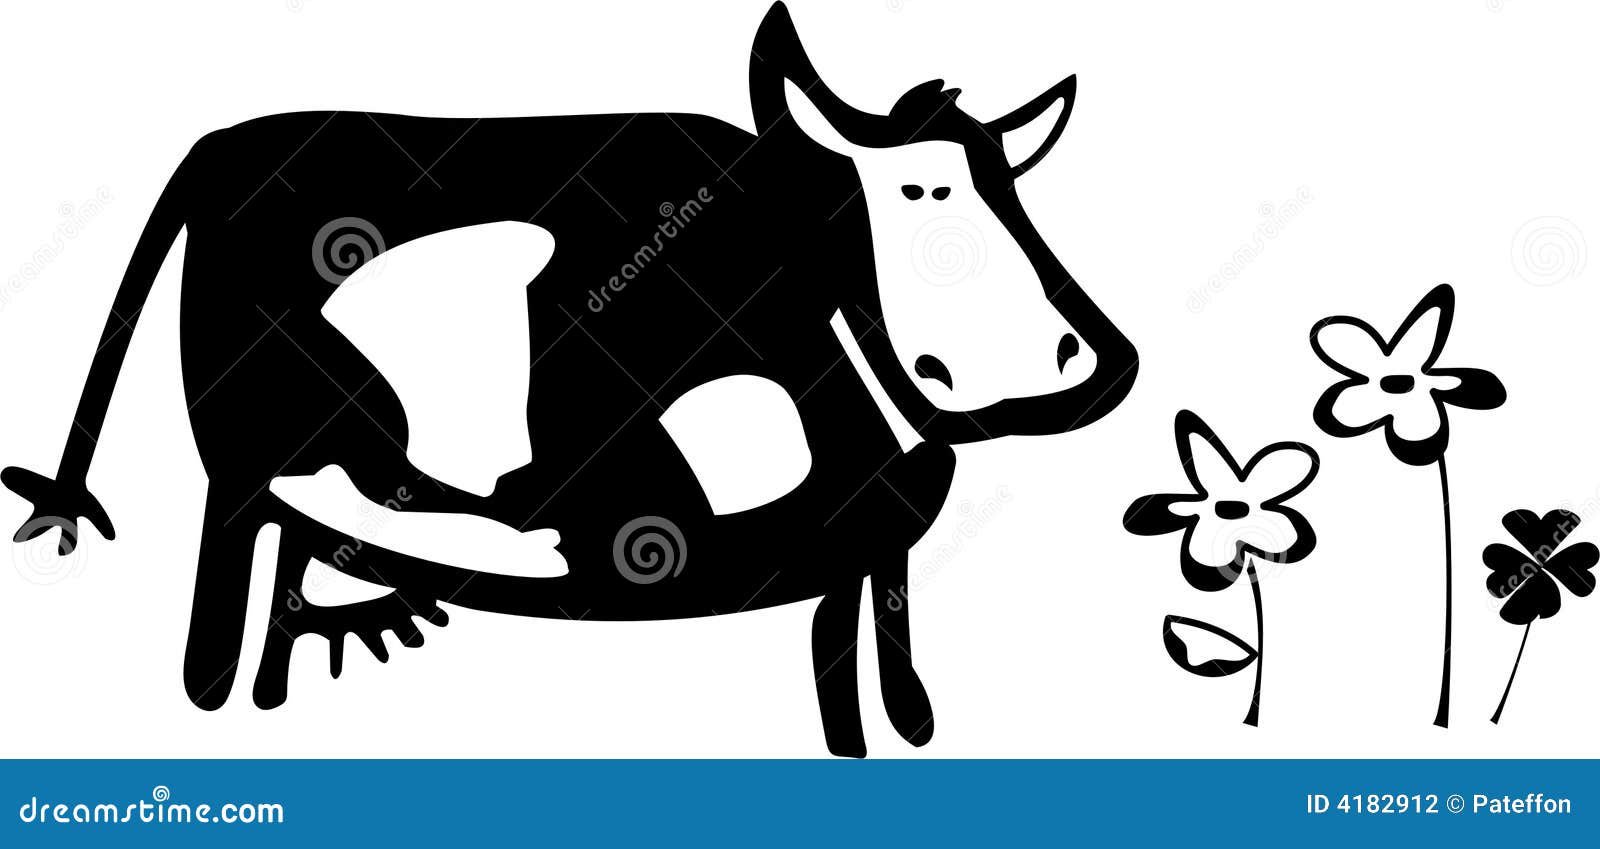 cow illustrations clipart - photo #44